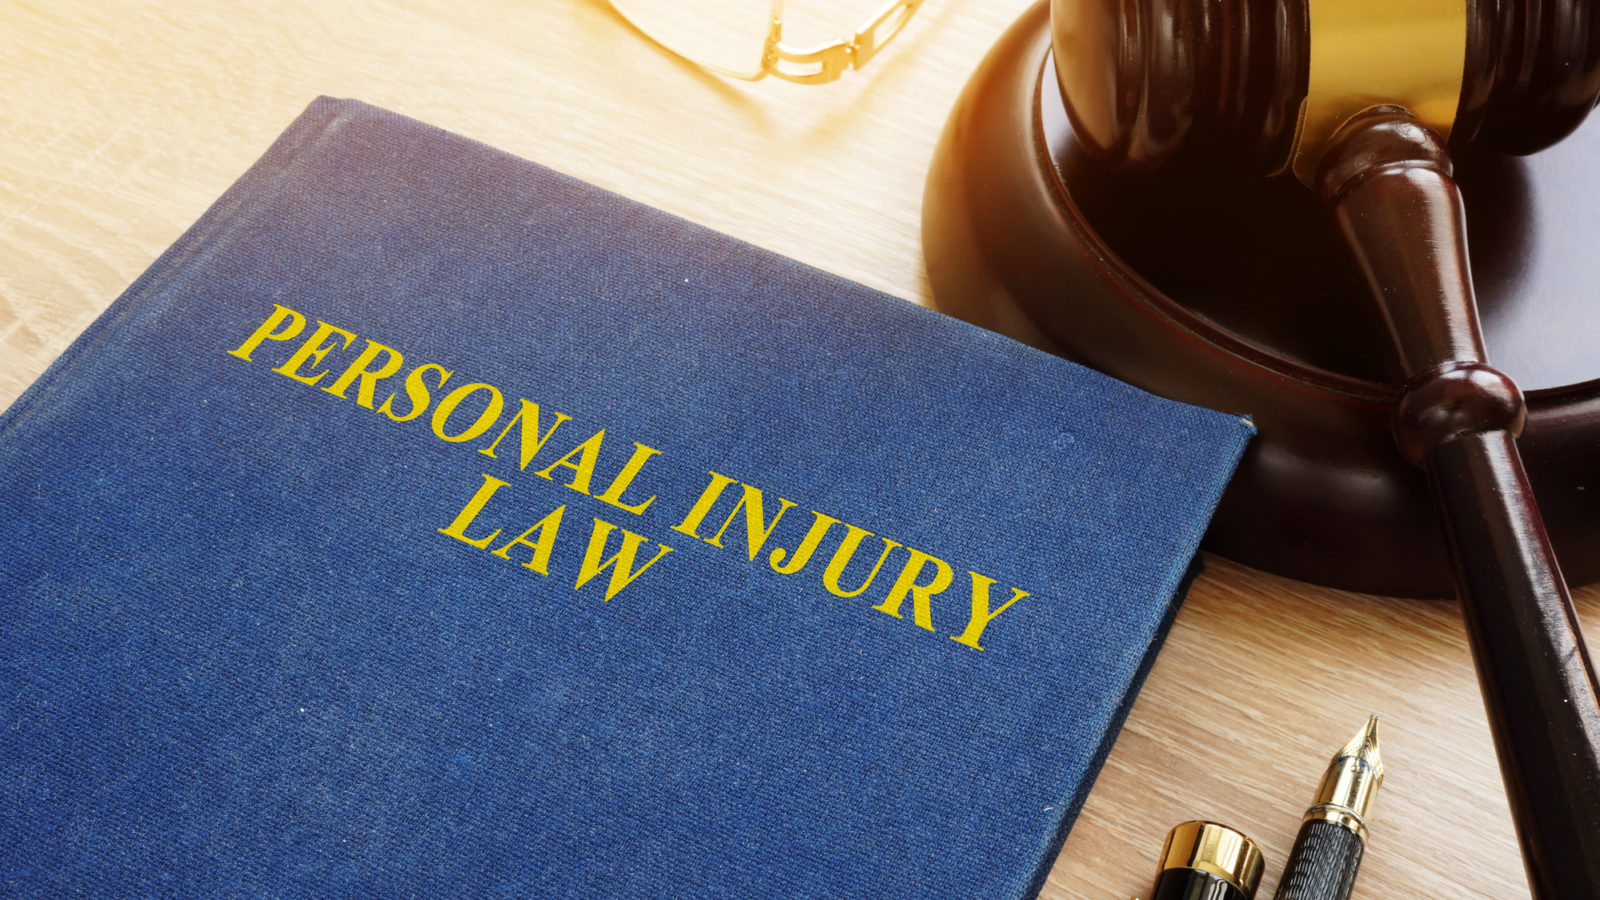 Personal Injury Lawyer - Personal injury law on a desk and gavel.